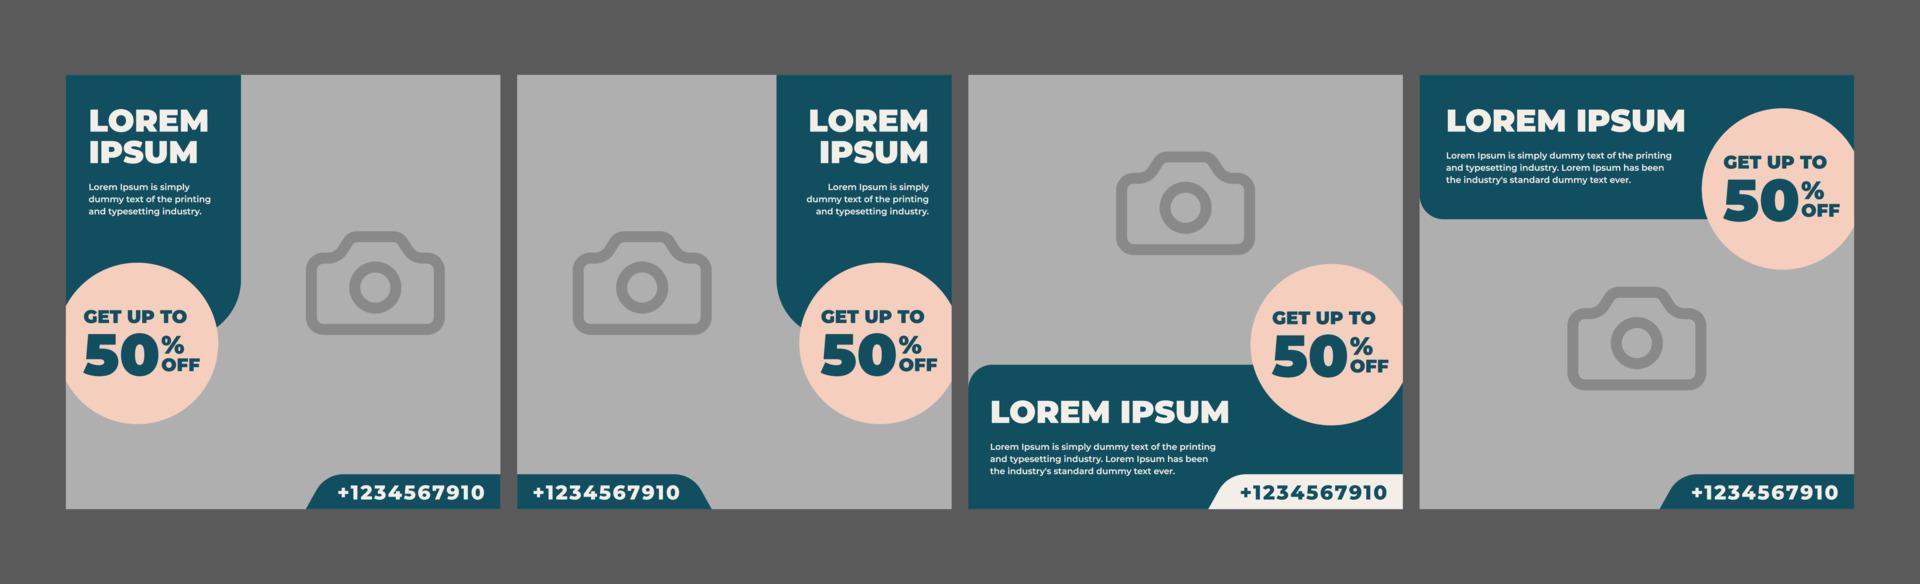 square banner template for social media. social media template for discount promo or advertisement vector